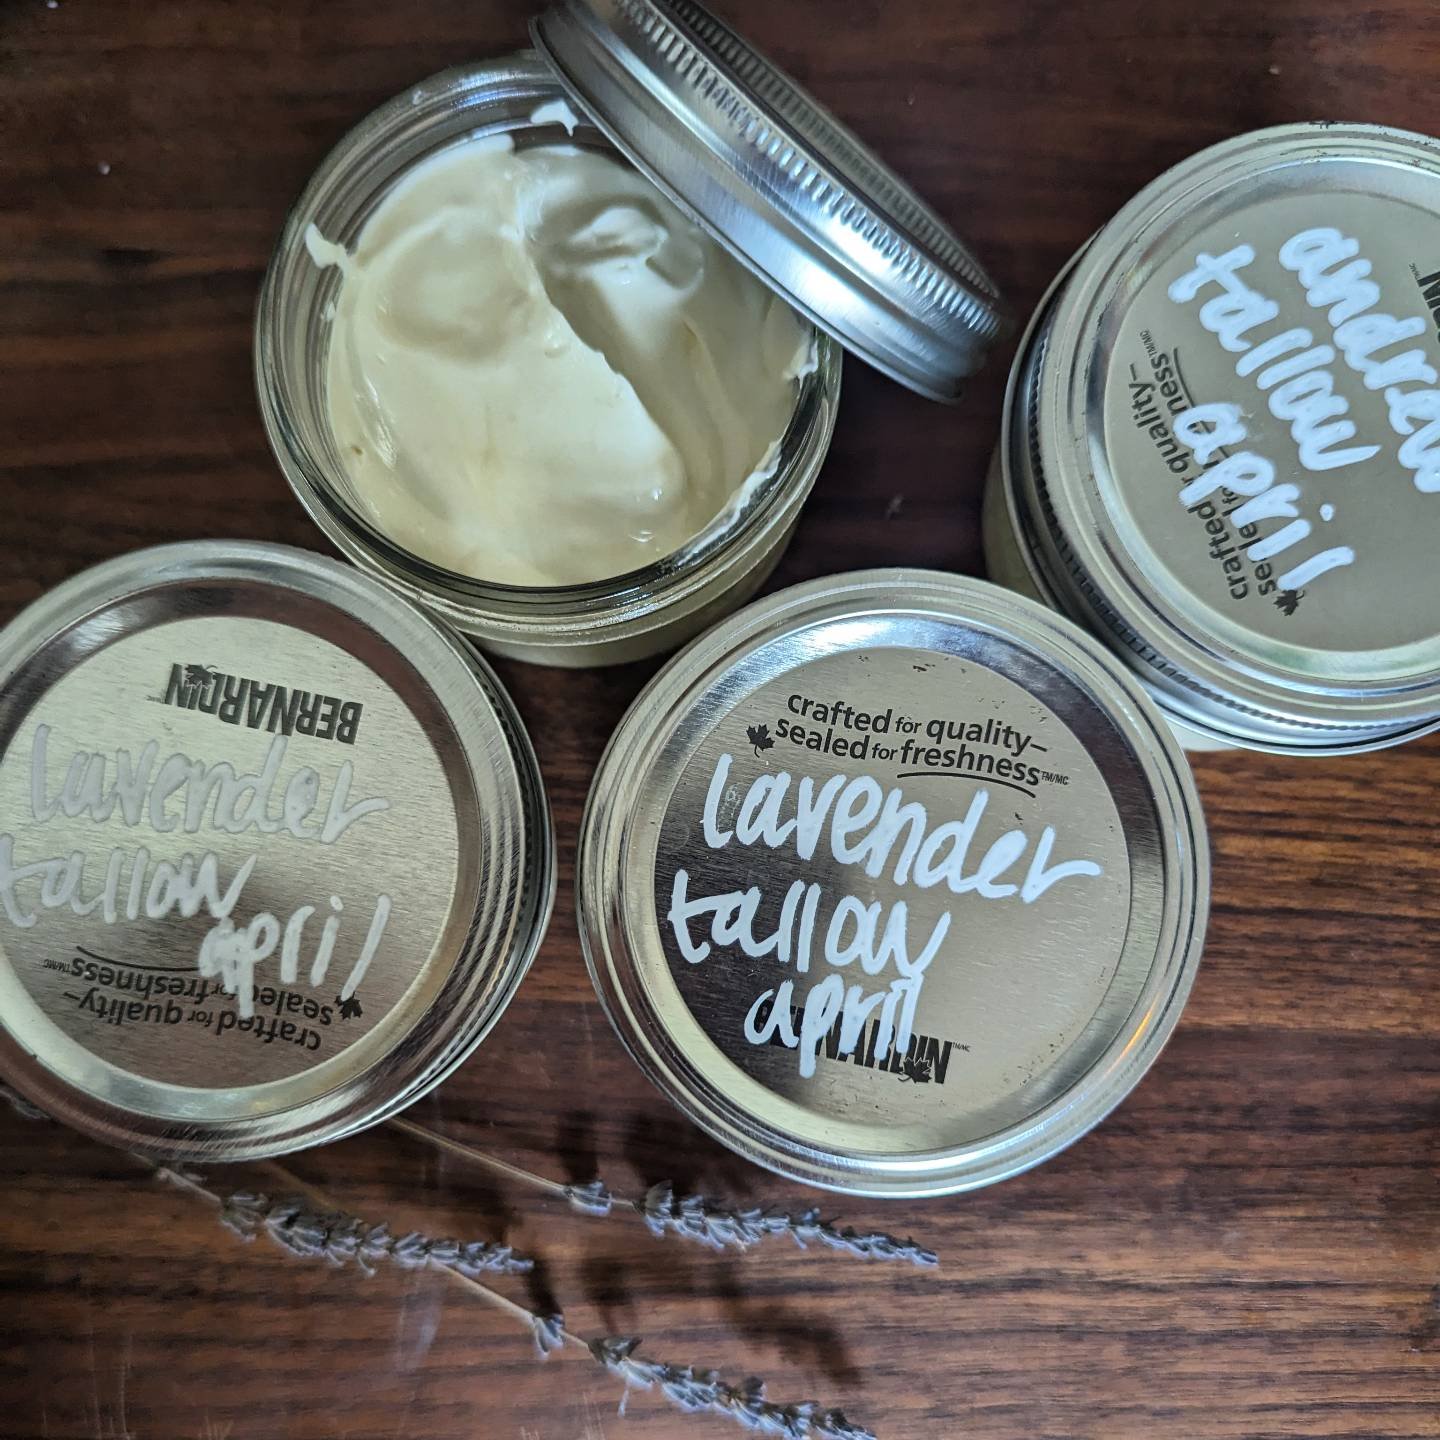 WHIPPED TALLOW BALM DIY 🐄🪻

After trialing some tallow balm &amp; loving it I figured I would try my hand at making a batch of my own! 

I sourced some local organic &amp; grass fed beef tallow and melted it down along with organic olive oil then c